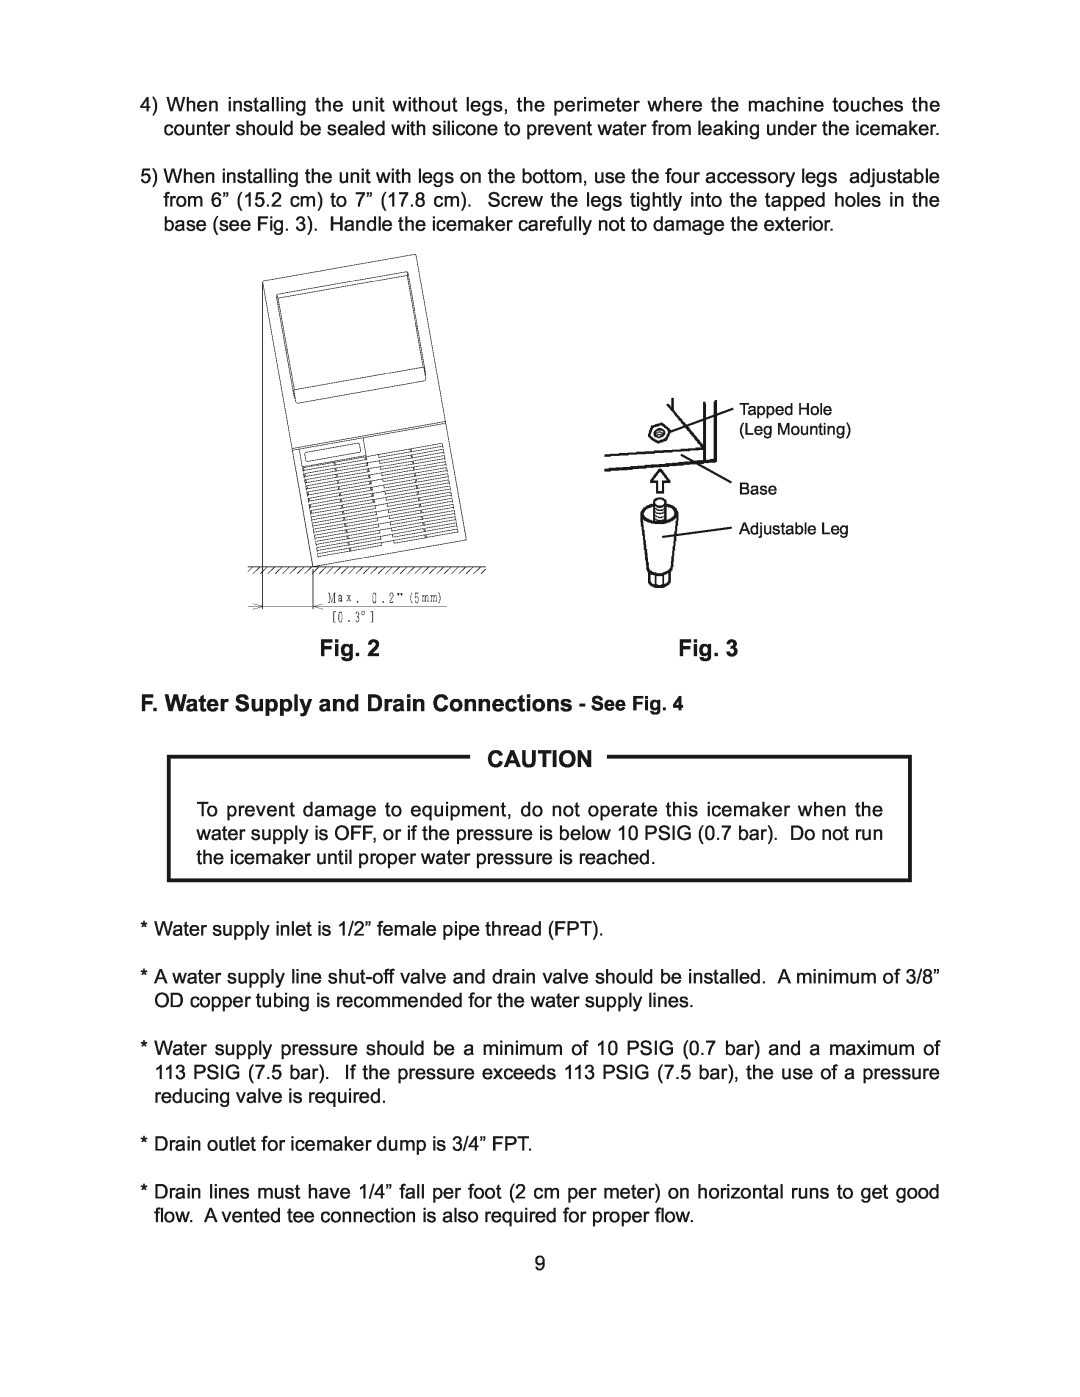 Hoshizaki KM-101BAH, KM-61BAH, KM-151BWH, KM-151BAH instruction manual F. Water Supply and Drain Connections - See Fig 